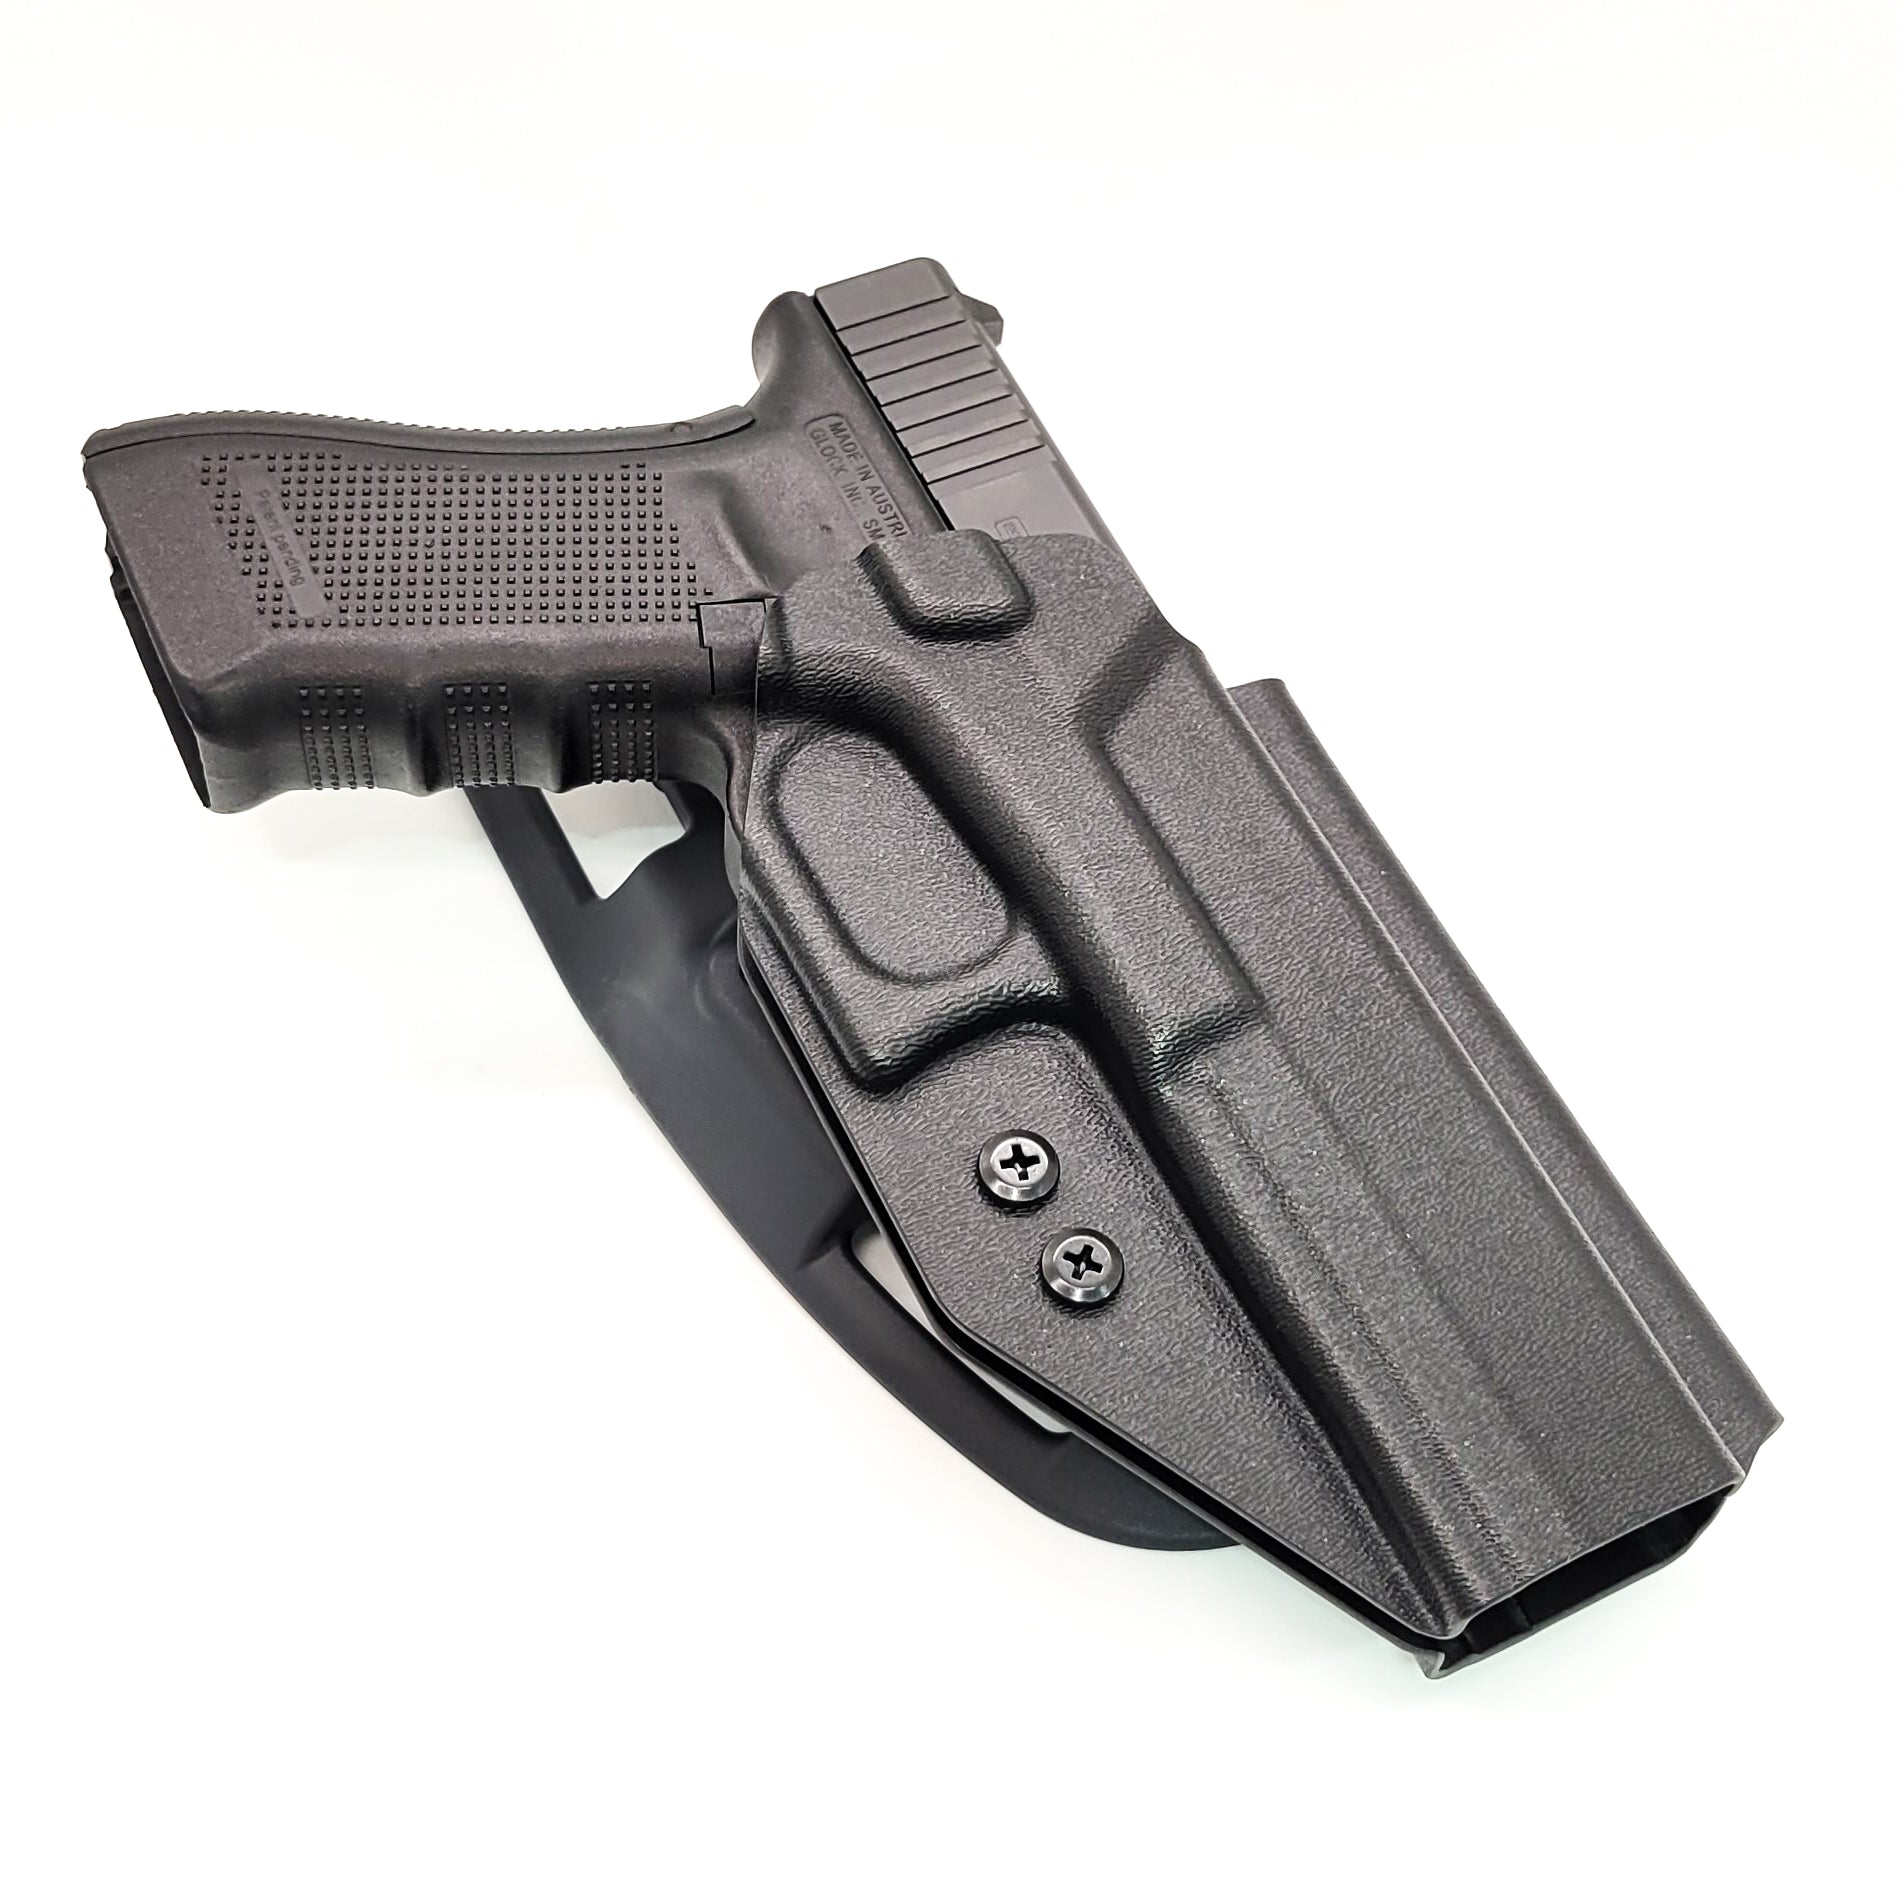 For the best outside waistband OWB duty & competition holster for the Glock 34 Generation Gen 5, shop Four Brothers Holsters.  Glock Gen 3 & 4 22, 17 MOS, Gen 3, 4 & 5 19, 23, 45, full size 40 S&W frame pistols.  The holster is cleared for a red dot sight. Adjustable Retention, molded with .080" Kydex, made in the USA.